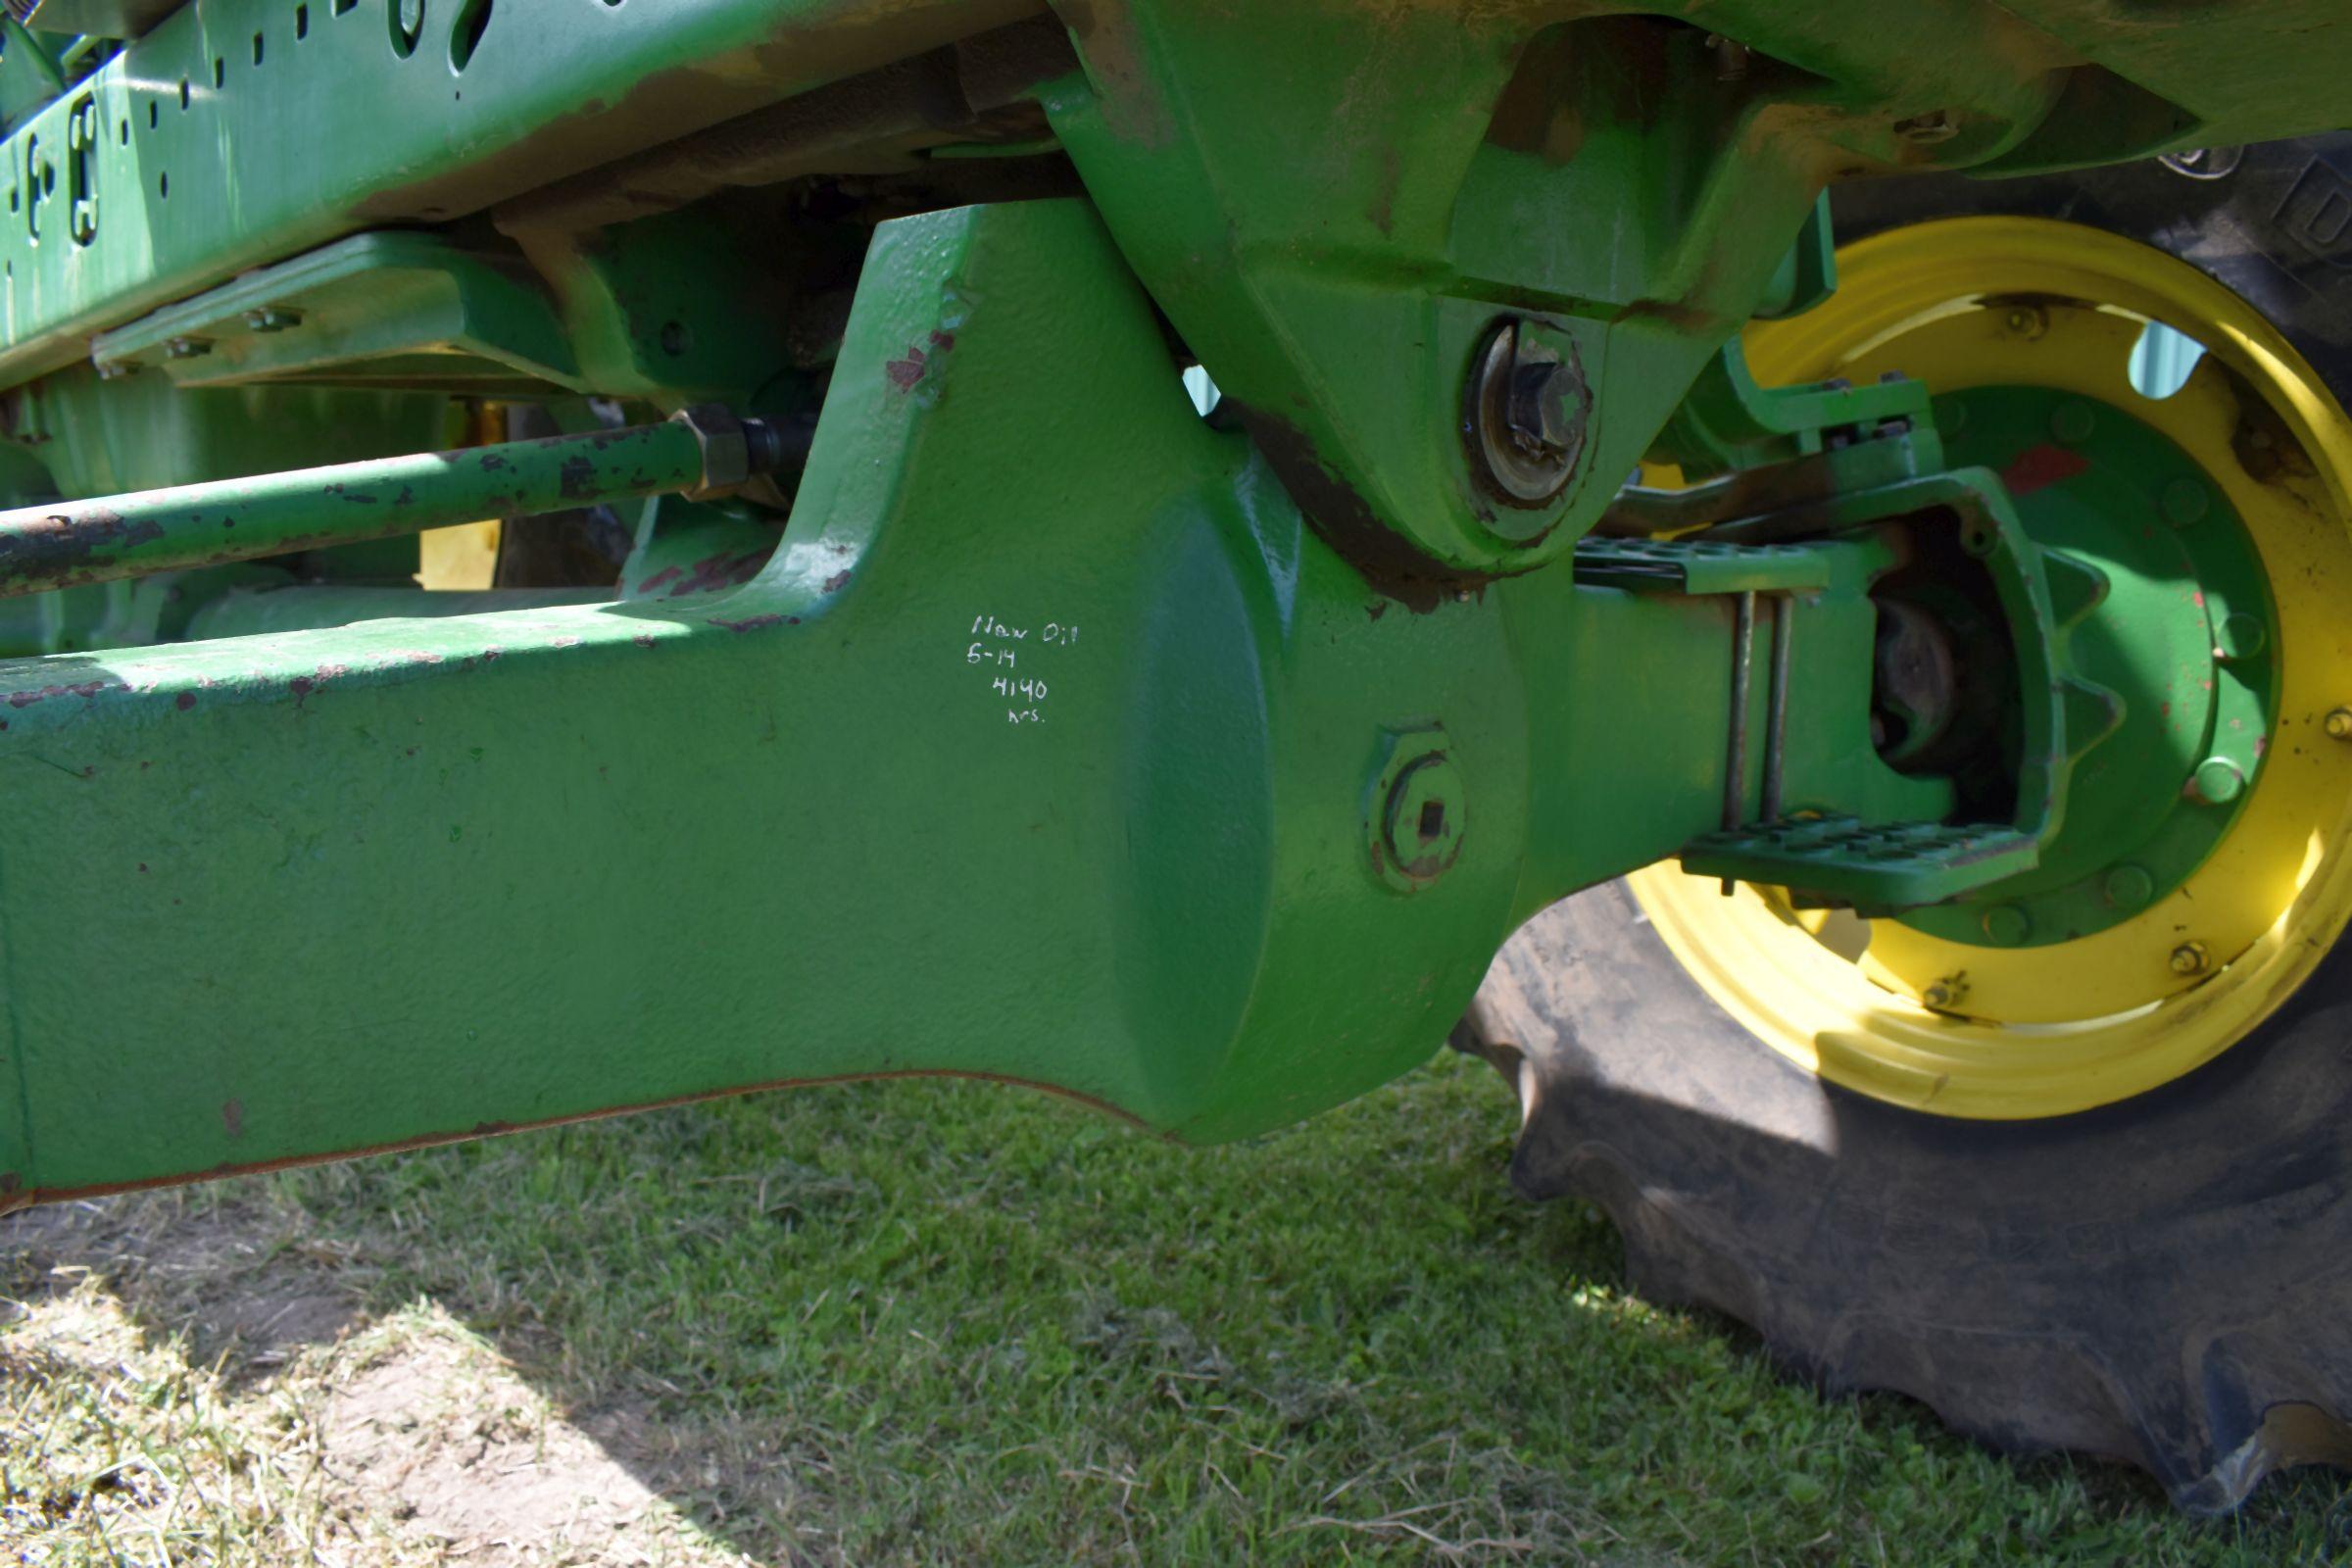 1986 John Deere 4850 MFWD 4665 Hours, Power Shift, 1000PTO, 3pt, 3 Hydraulics, 20 Front Weights, Fro